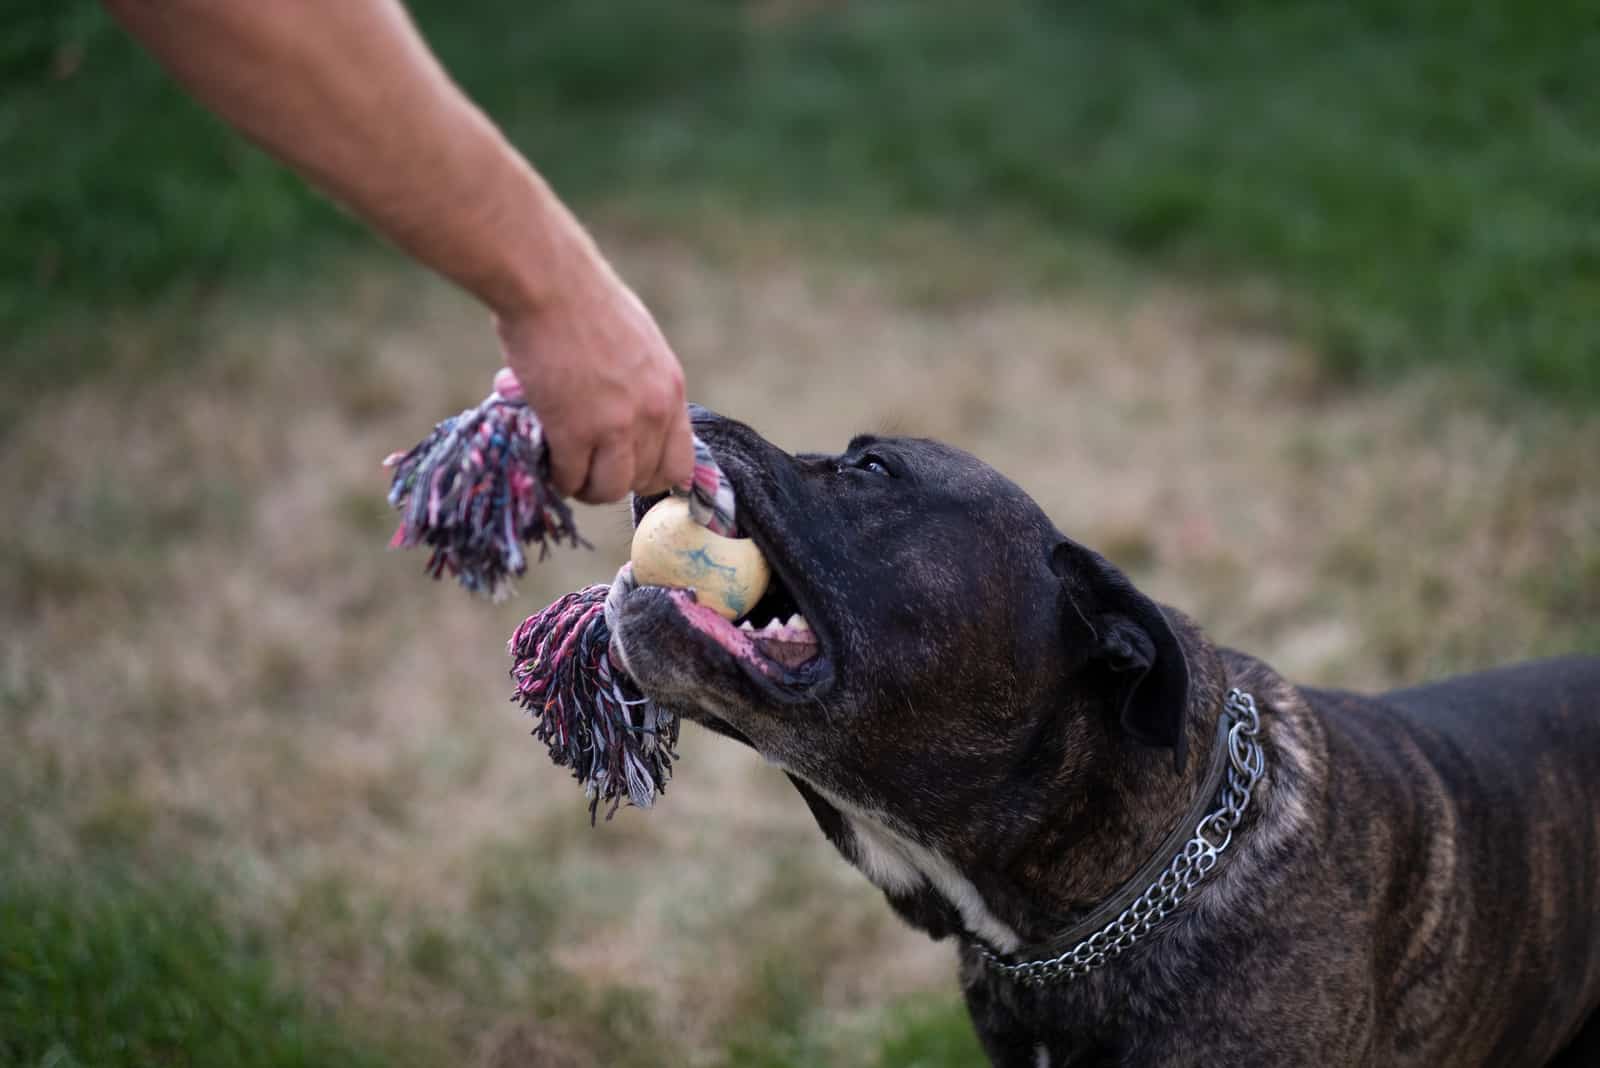 cane corso pulling on a dog toy